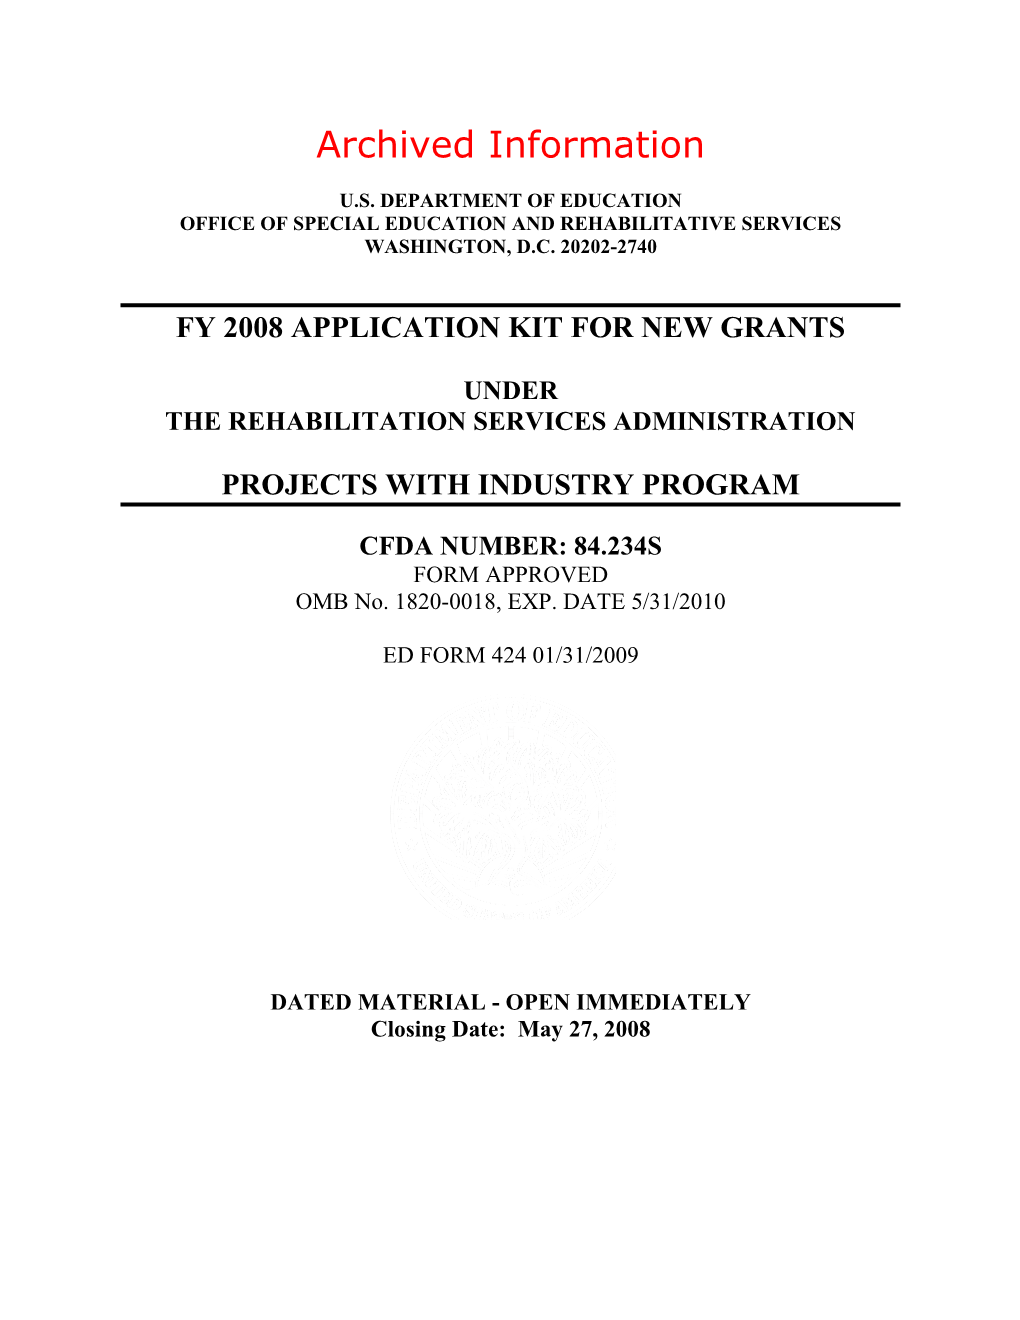 Archived: FY08 Application for New Grants Under the Rehabilitation Services Administration;